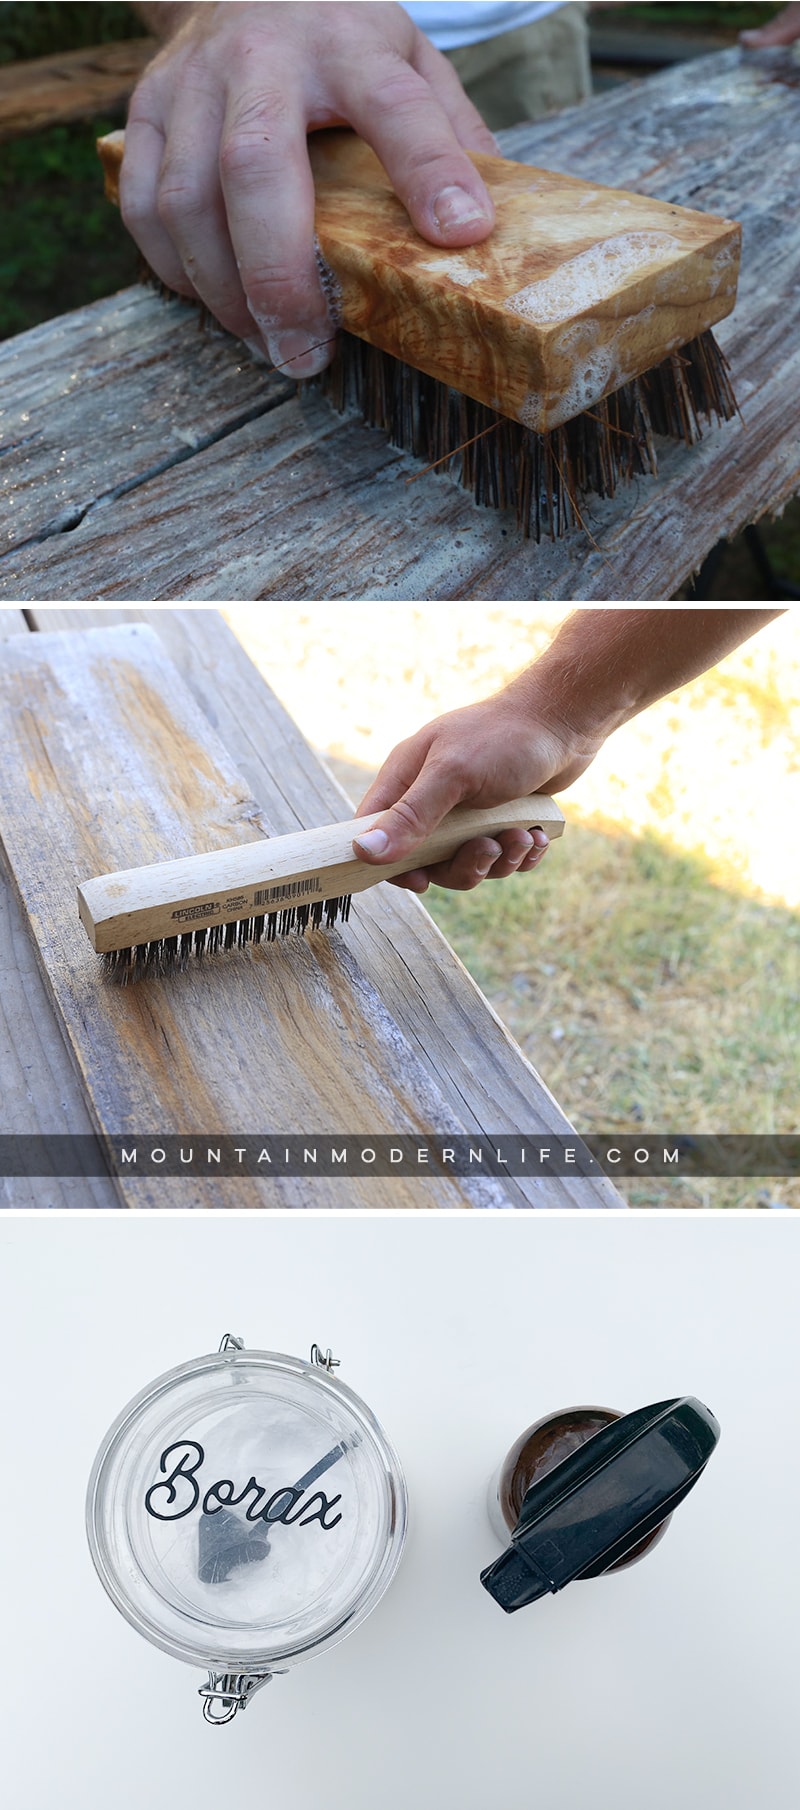 How to clean reclaimed wood (and make sure it's bug-free!) before you bring it into your home or RV | MountainModernLife.com